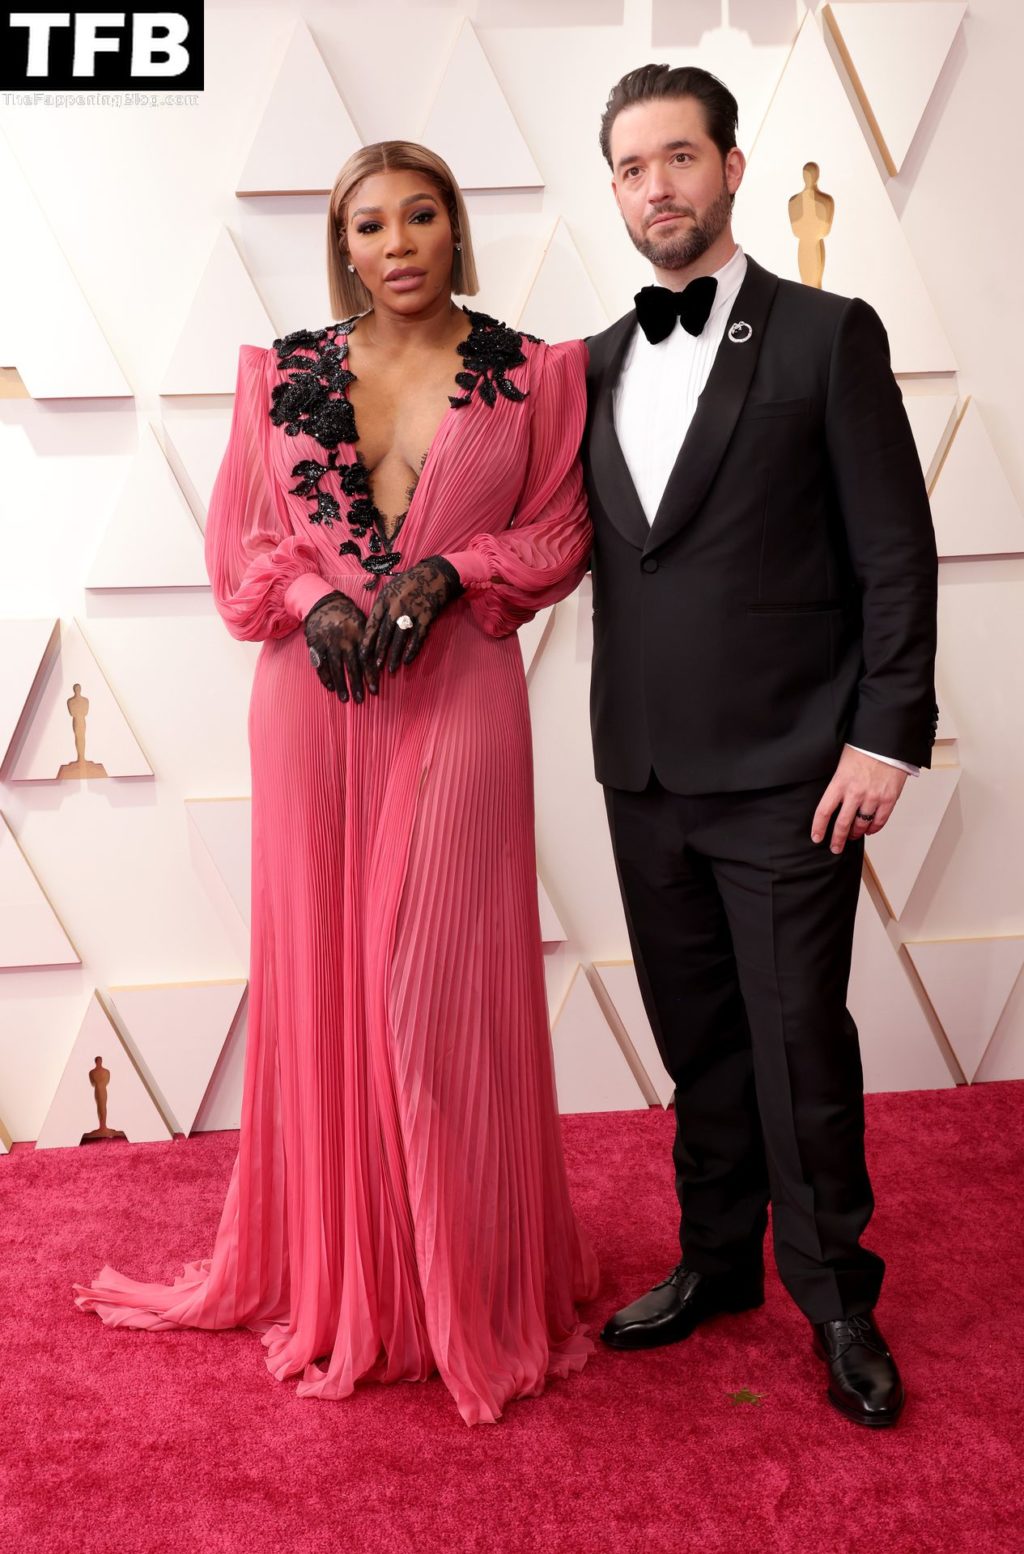 Serena Williams Sexy The Fappening Blog 2 1024x1554 - Serena Williams Poses on the Red Carpet at the 94th Annual Academy Awards (3 Photos)